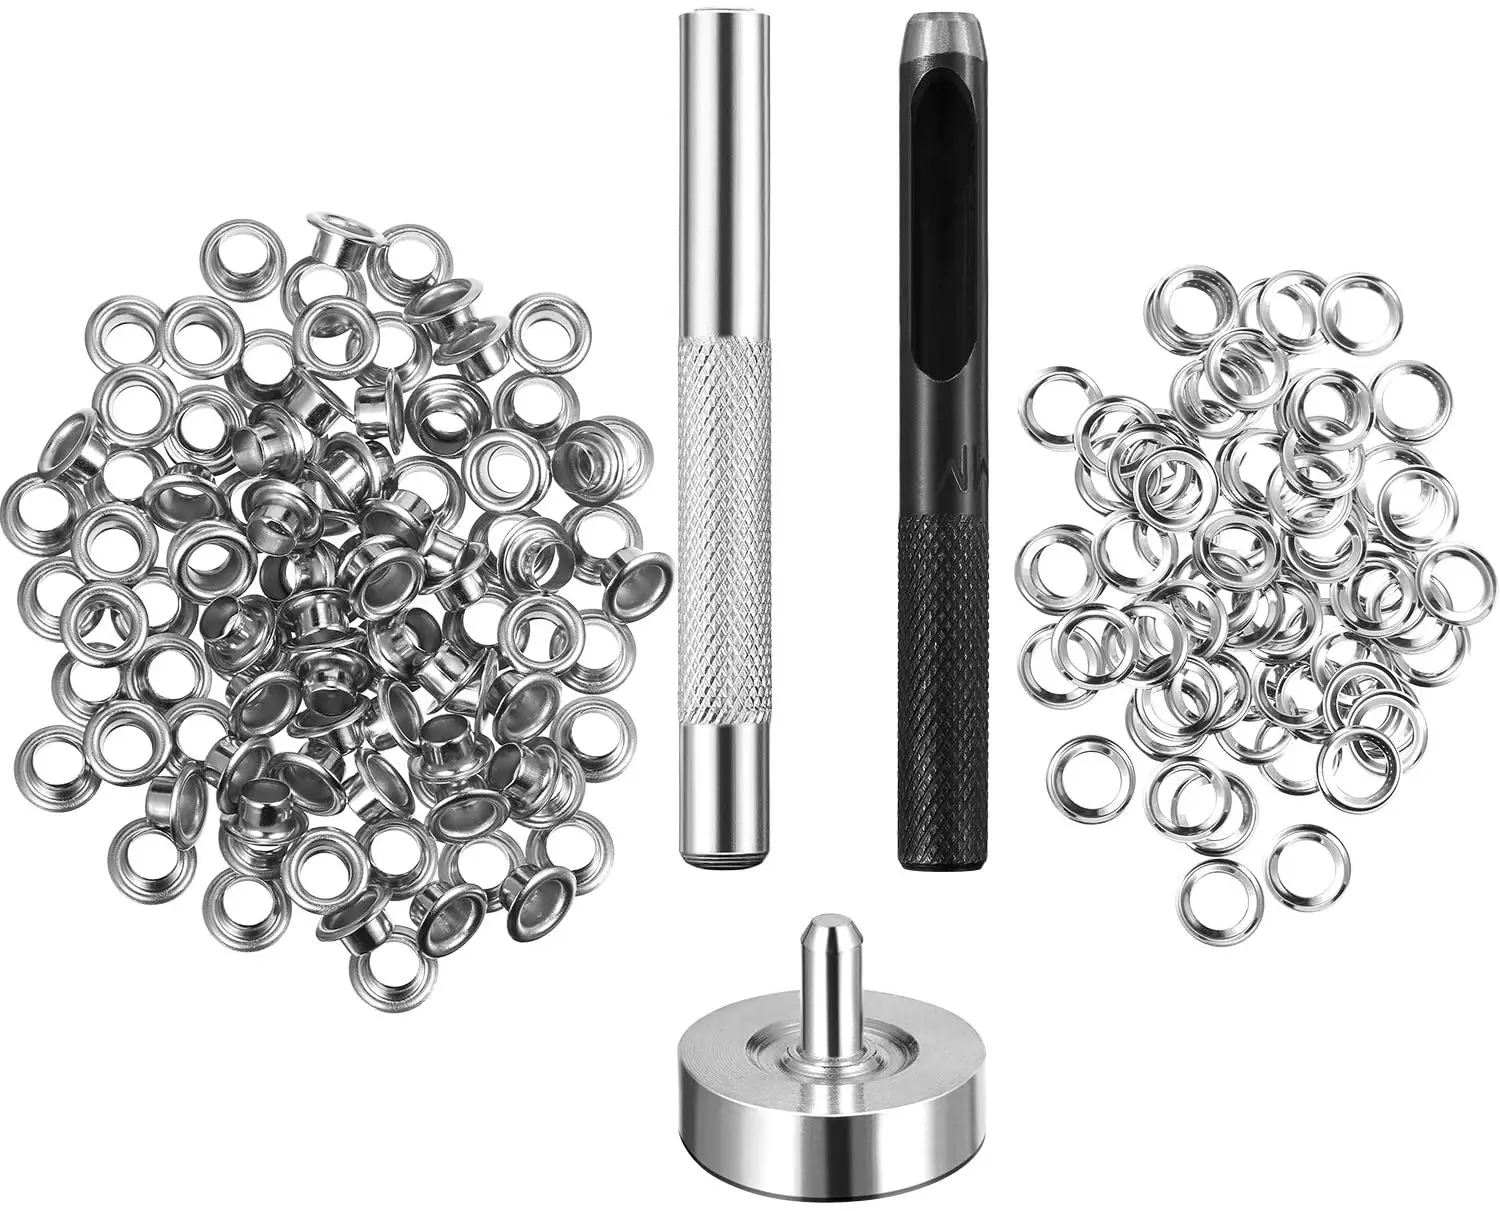 4/6/8/10/20mm 100 Set Silver Eyelet and Eyelet Punch Die Tool Set Metal Button for DIY Leather Craft Clothing Shoes Belt Grommet